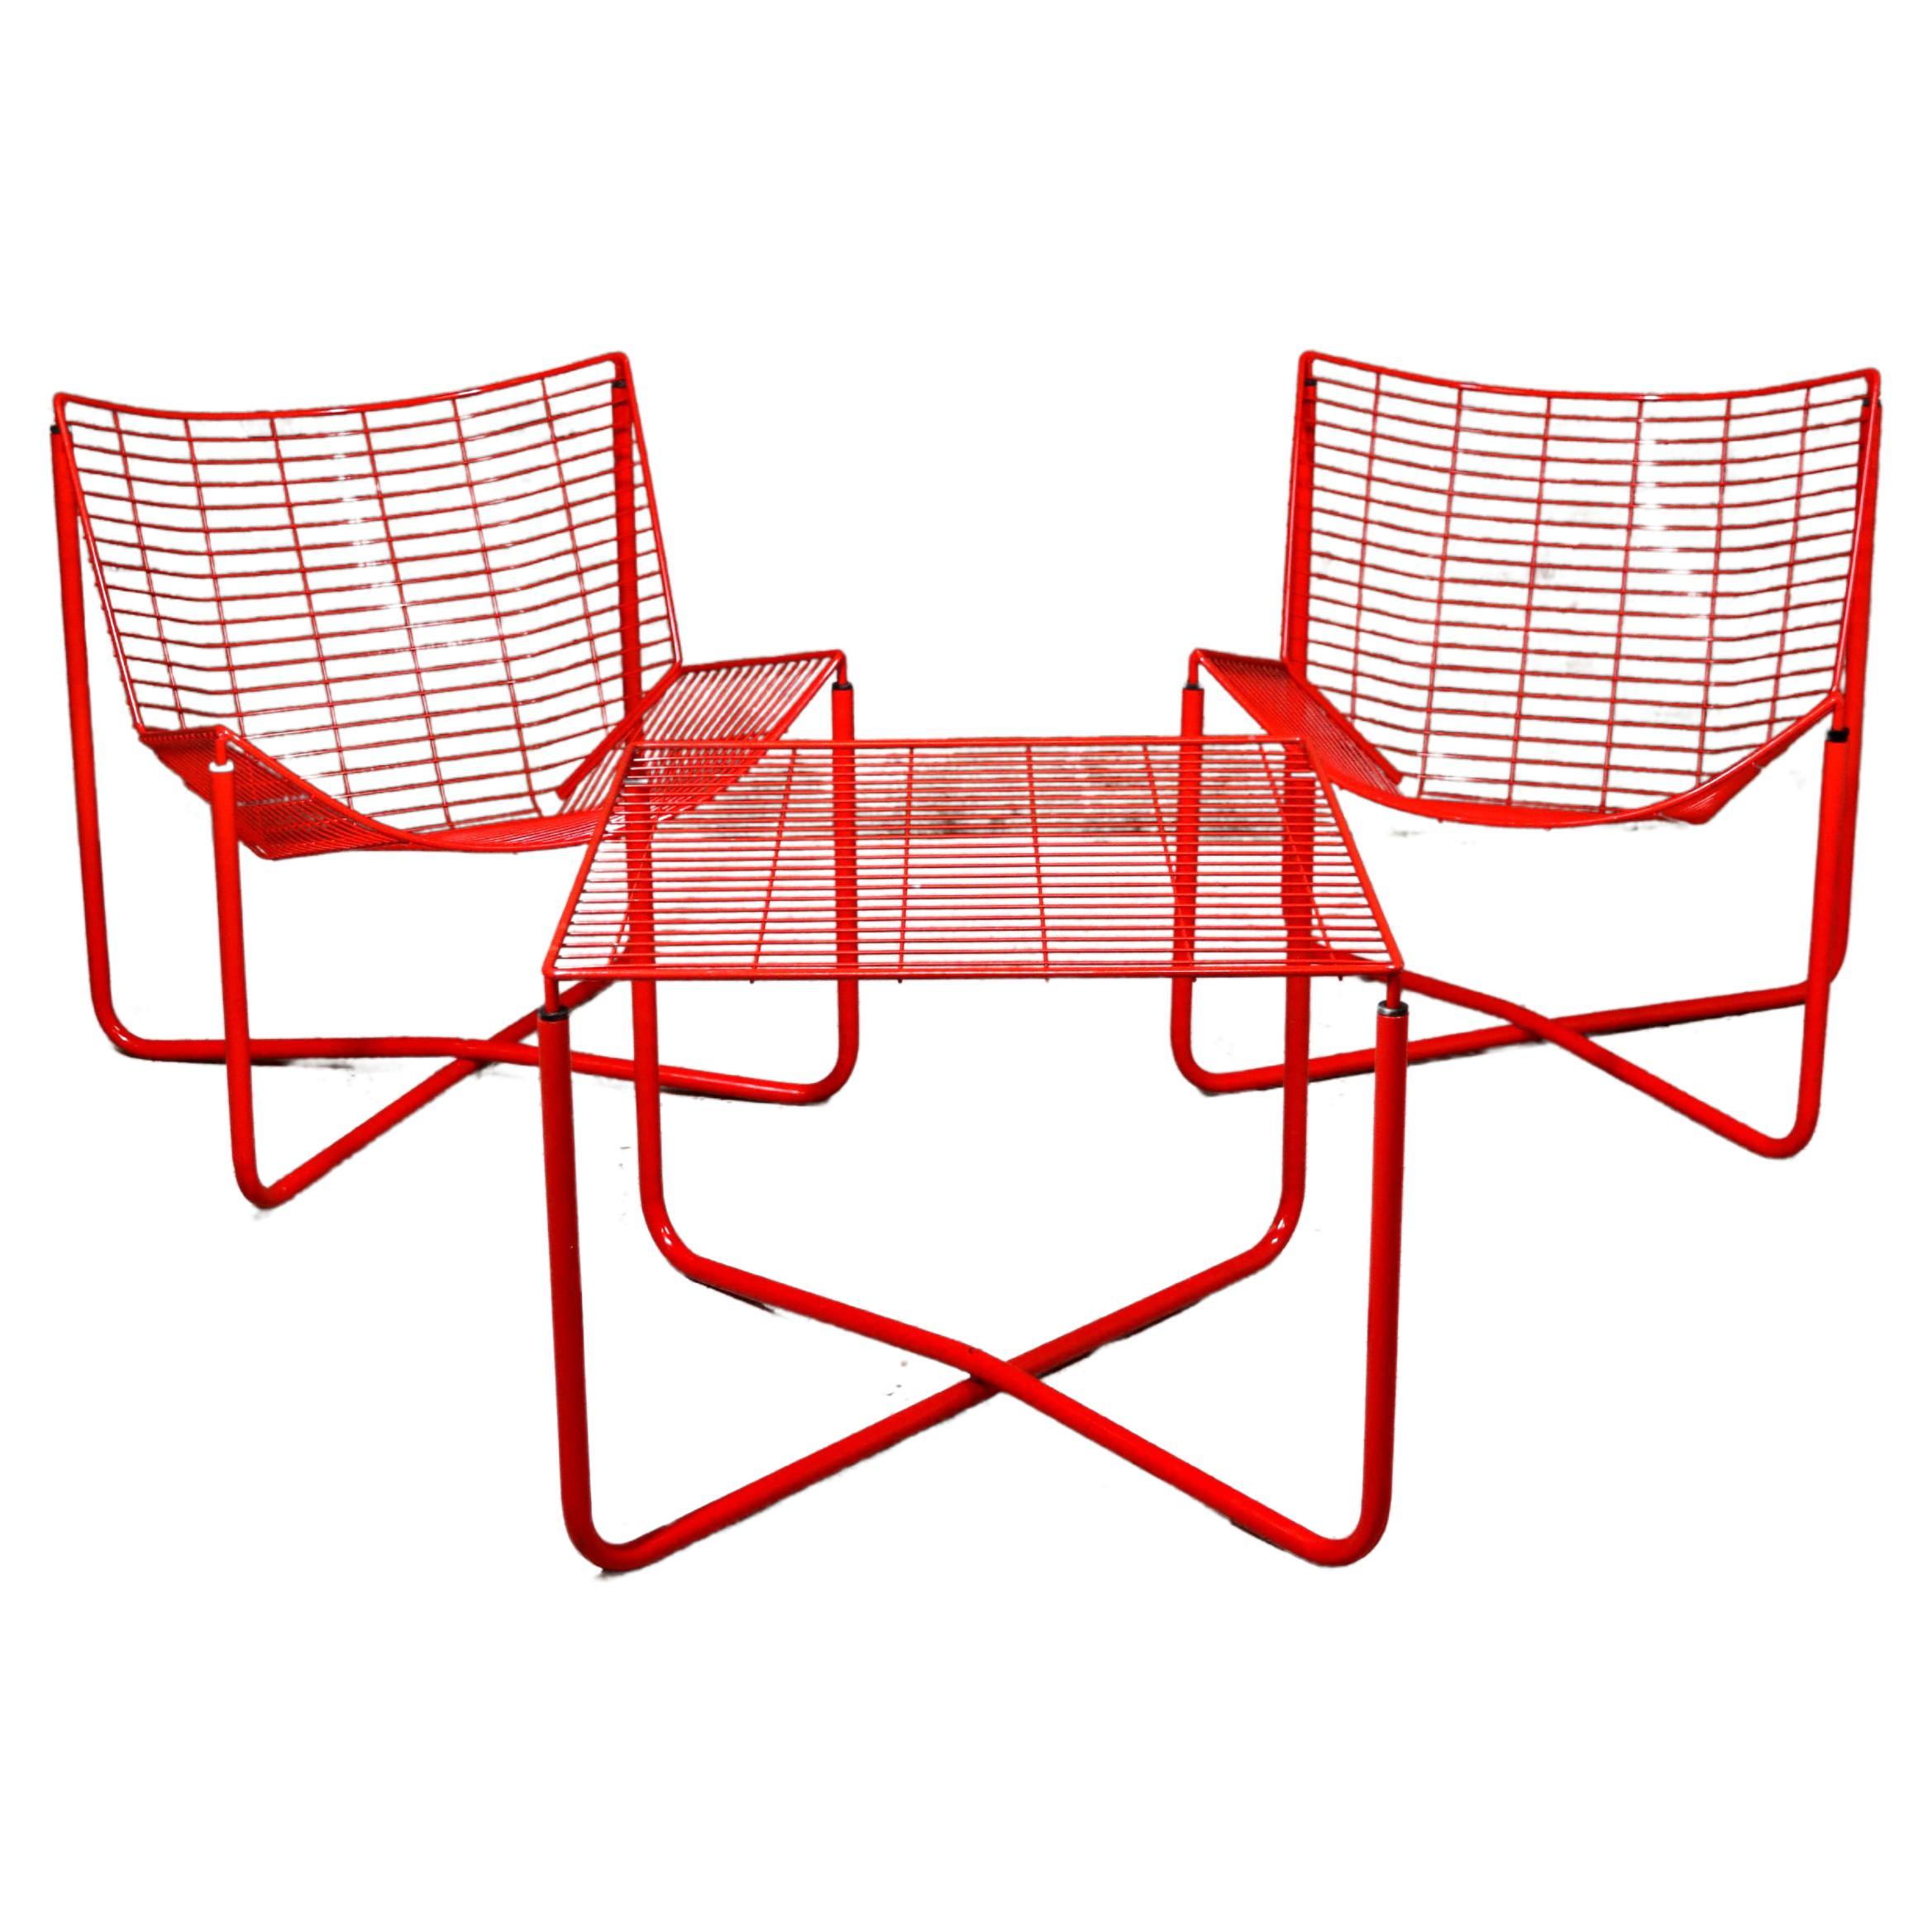 IKEA – Jarpen – Red Lounge Chairs and Table – Niels Gammelgaard – 1983